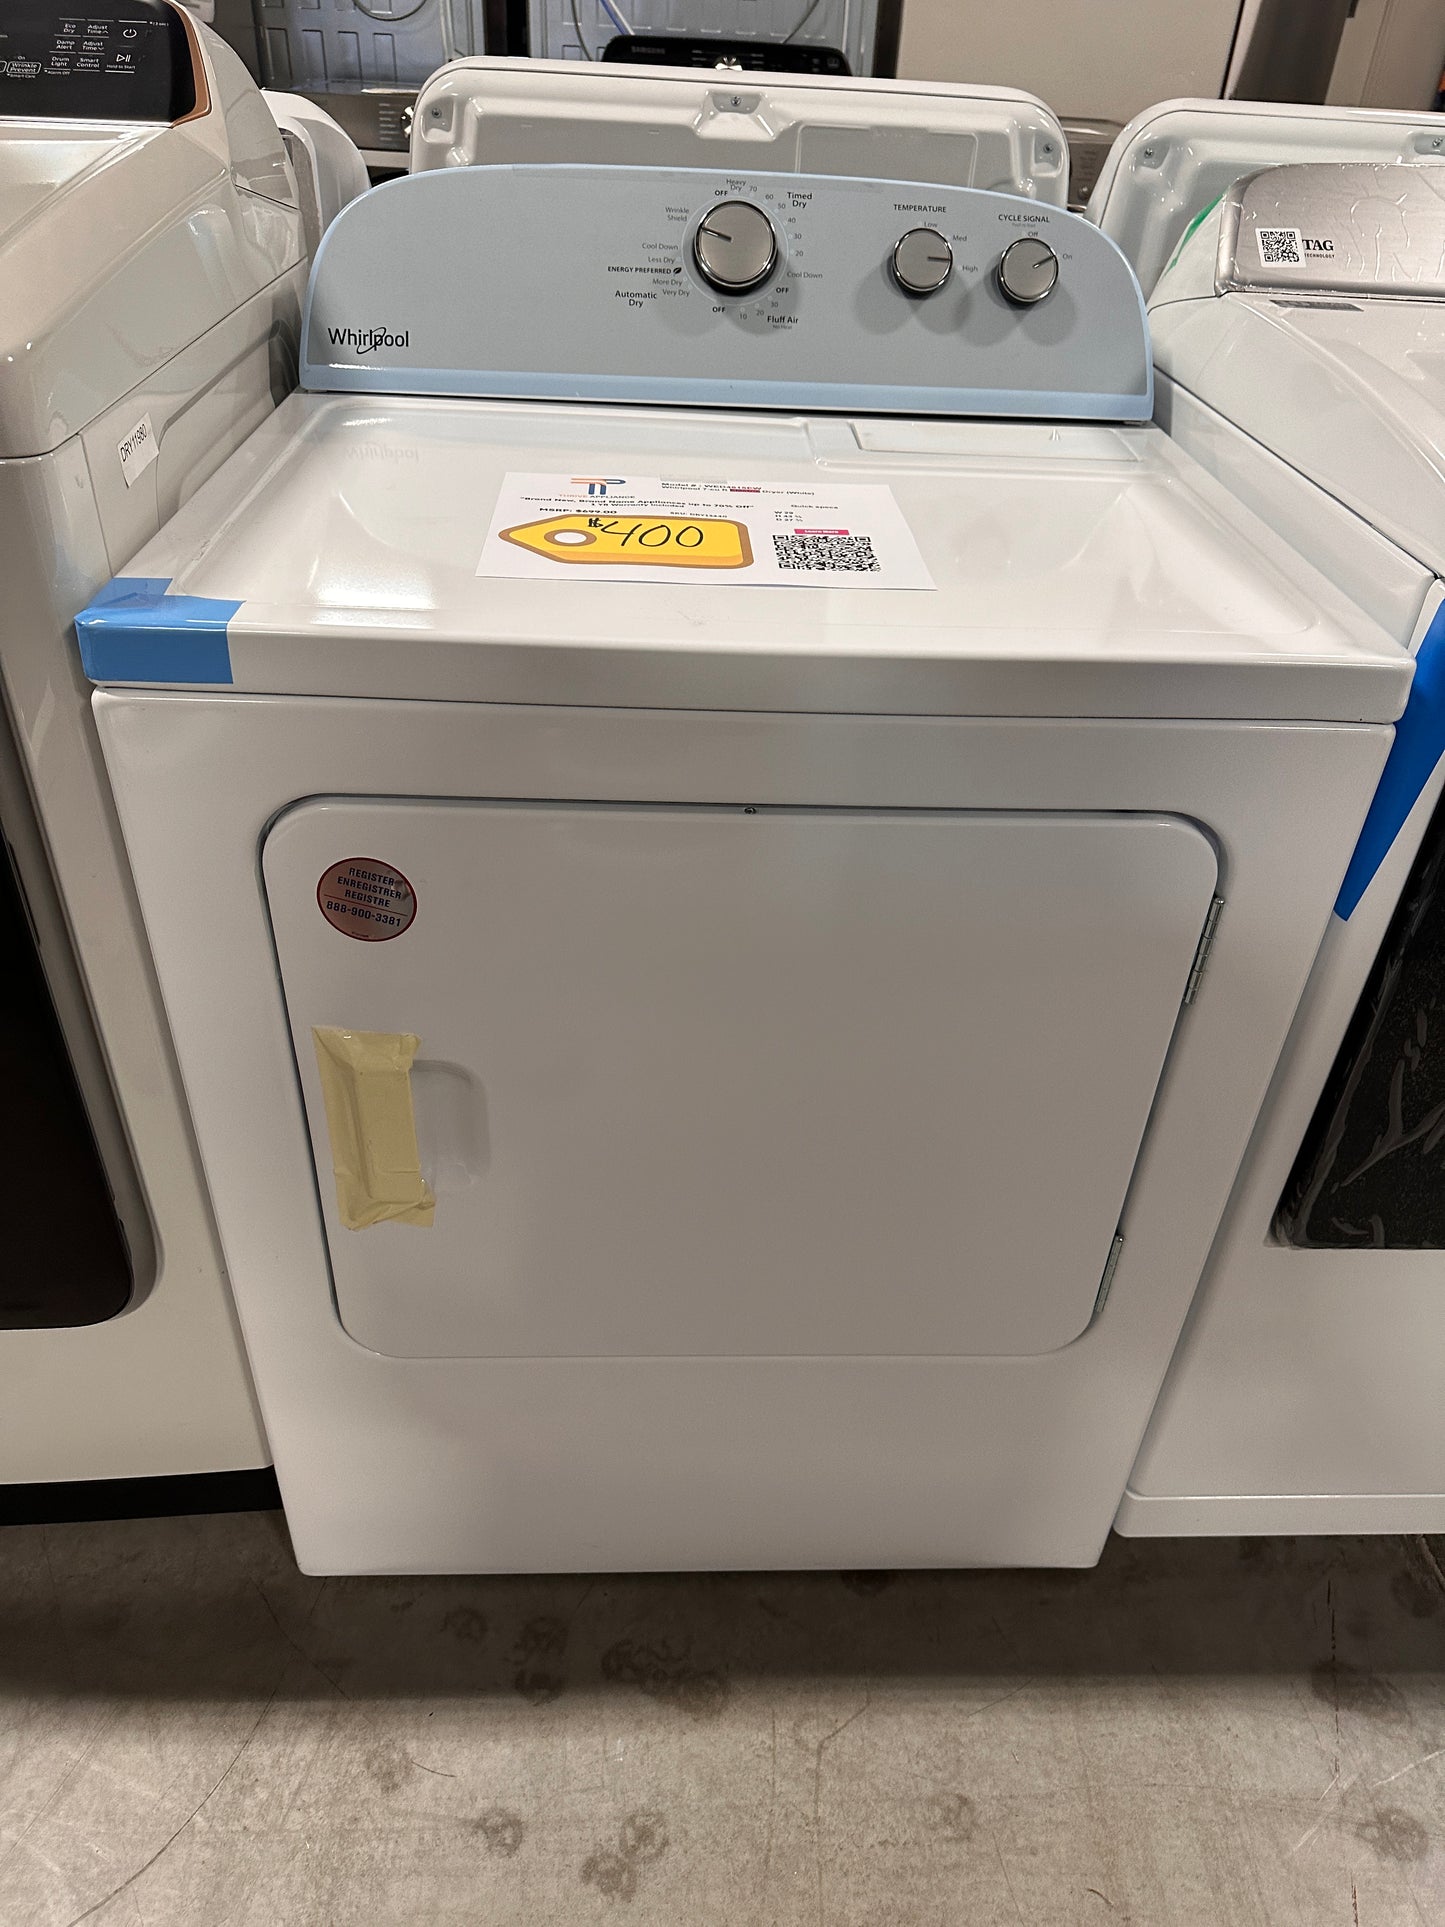 WHIRLPOOL 14-CYCLE ELECTRIC DRYER - NEW - MODEL: WED4815EW  DRY12440